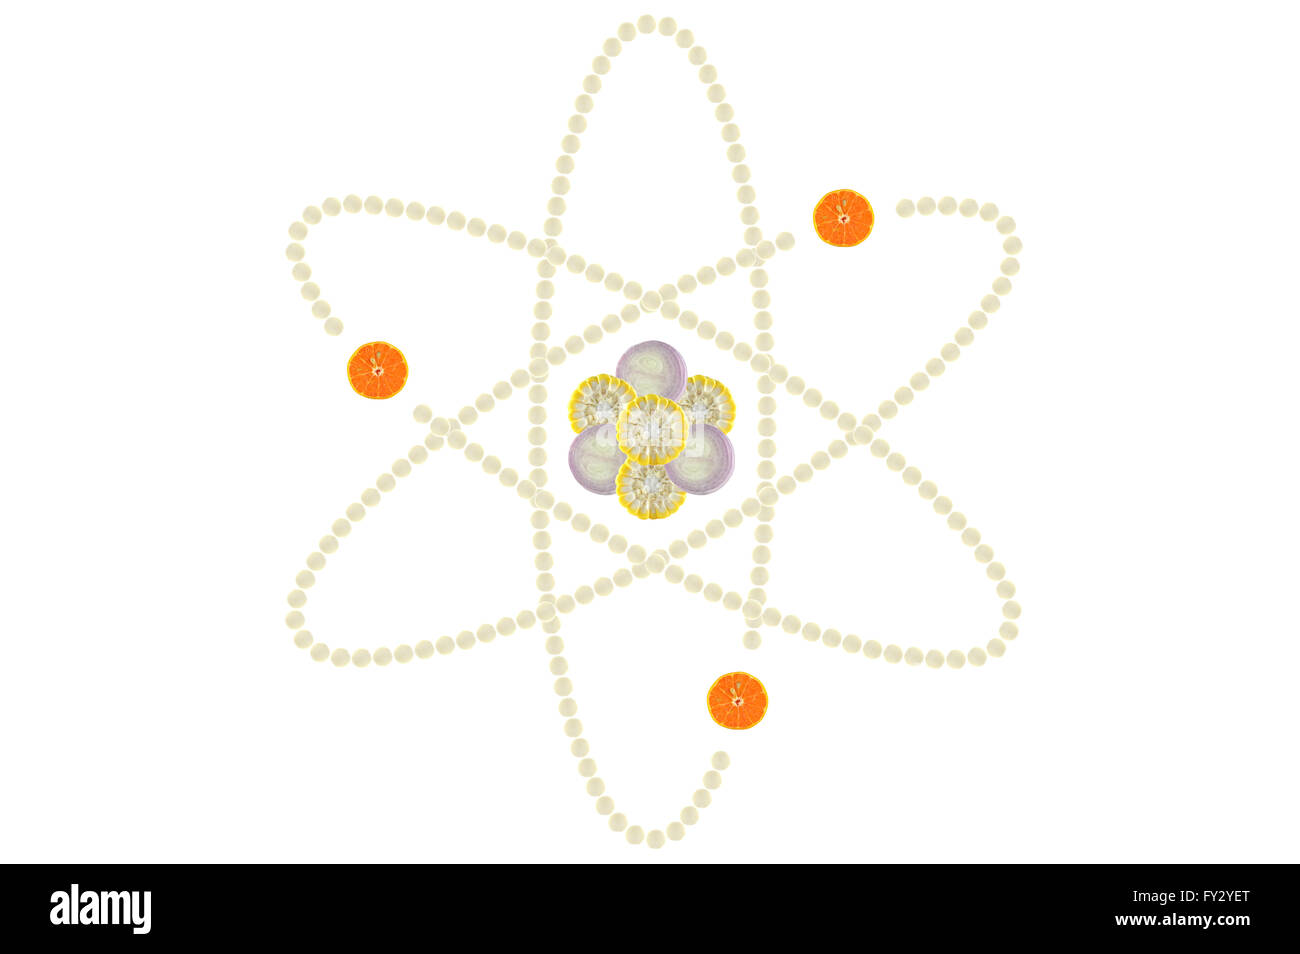 Atomic structure on white background Stock Photo